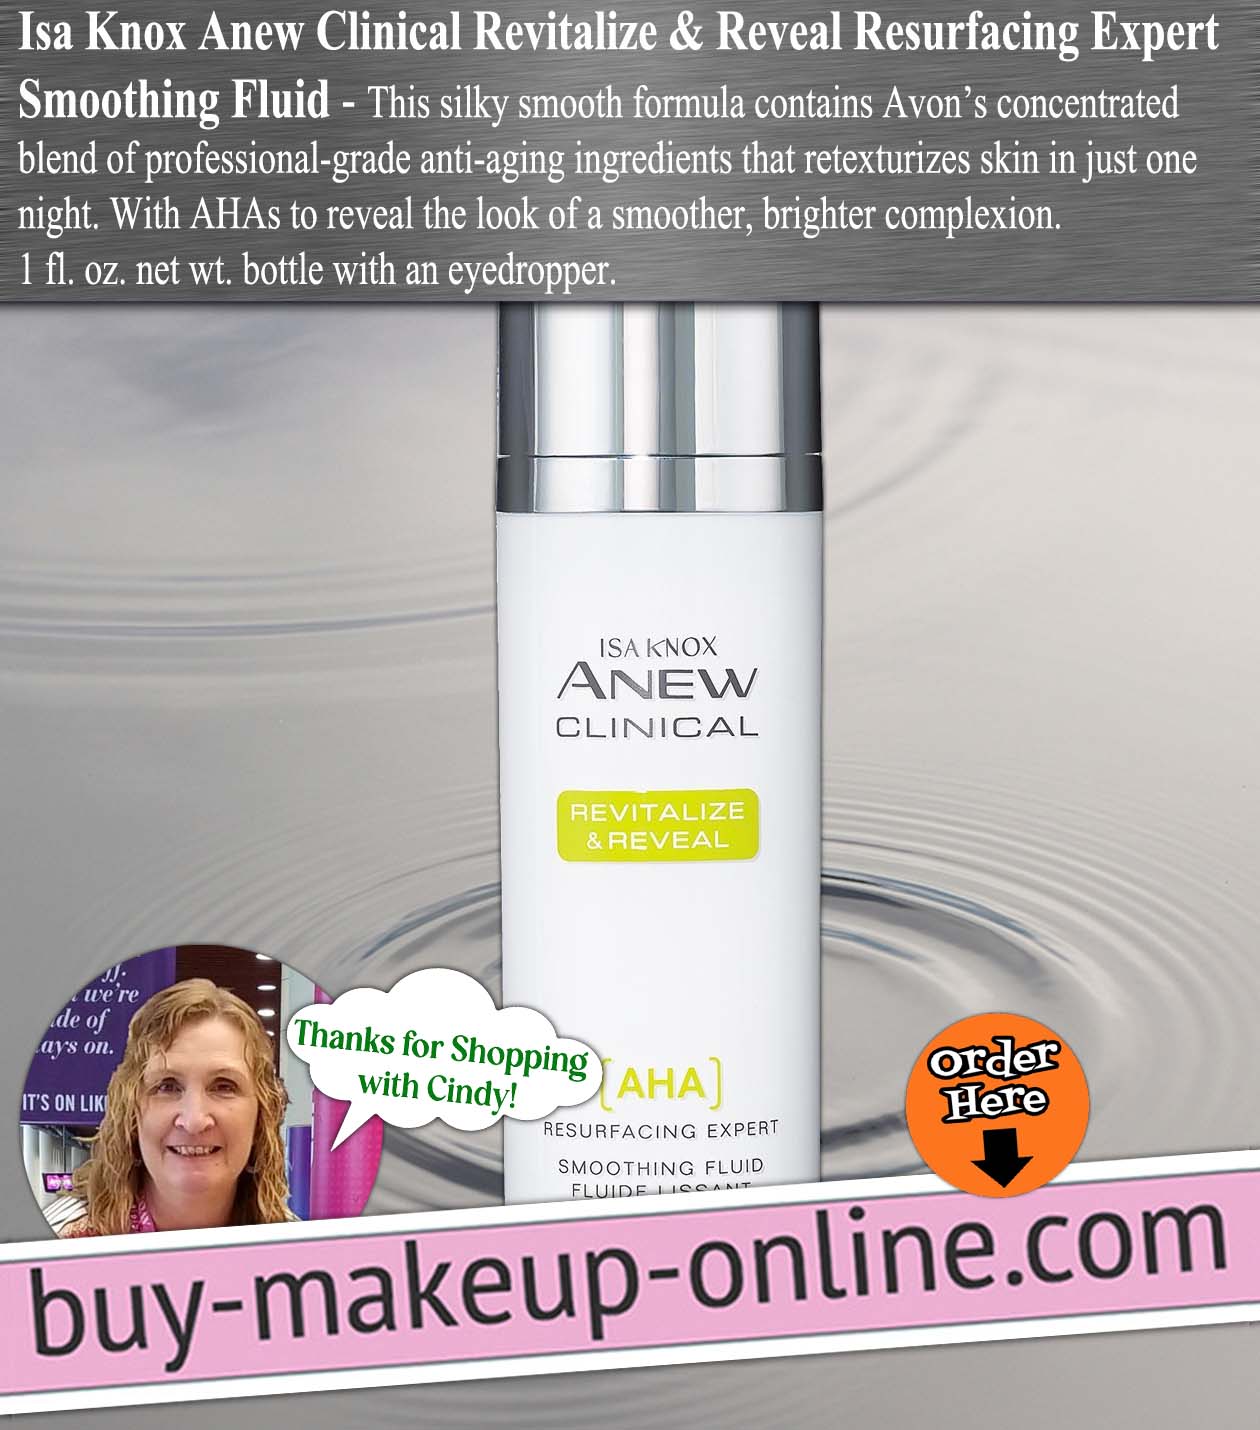 AVON Isa Knox Anew Clinical Revitalize & Reveal Resurfacing Expert Smoothing Fluid 